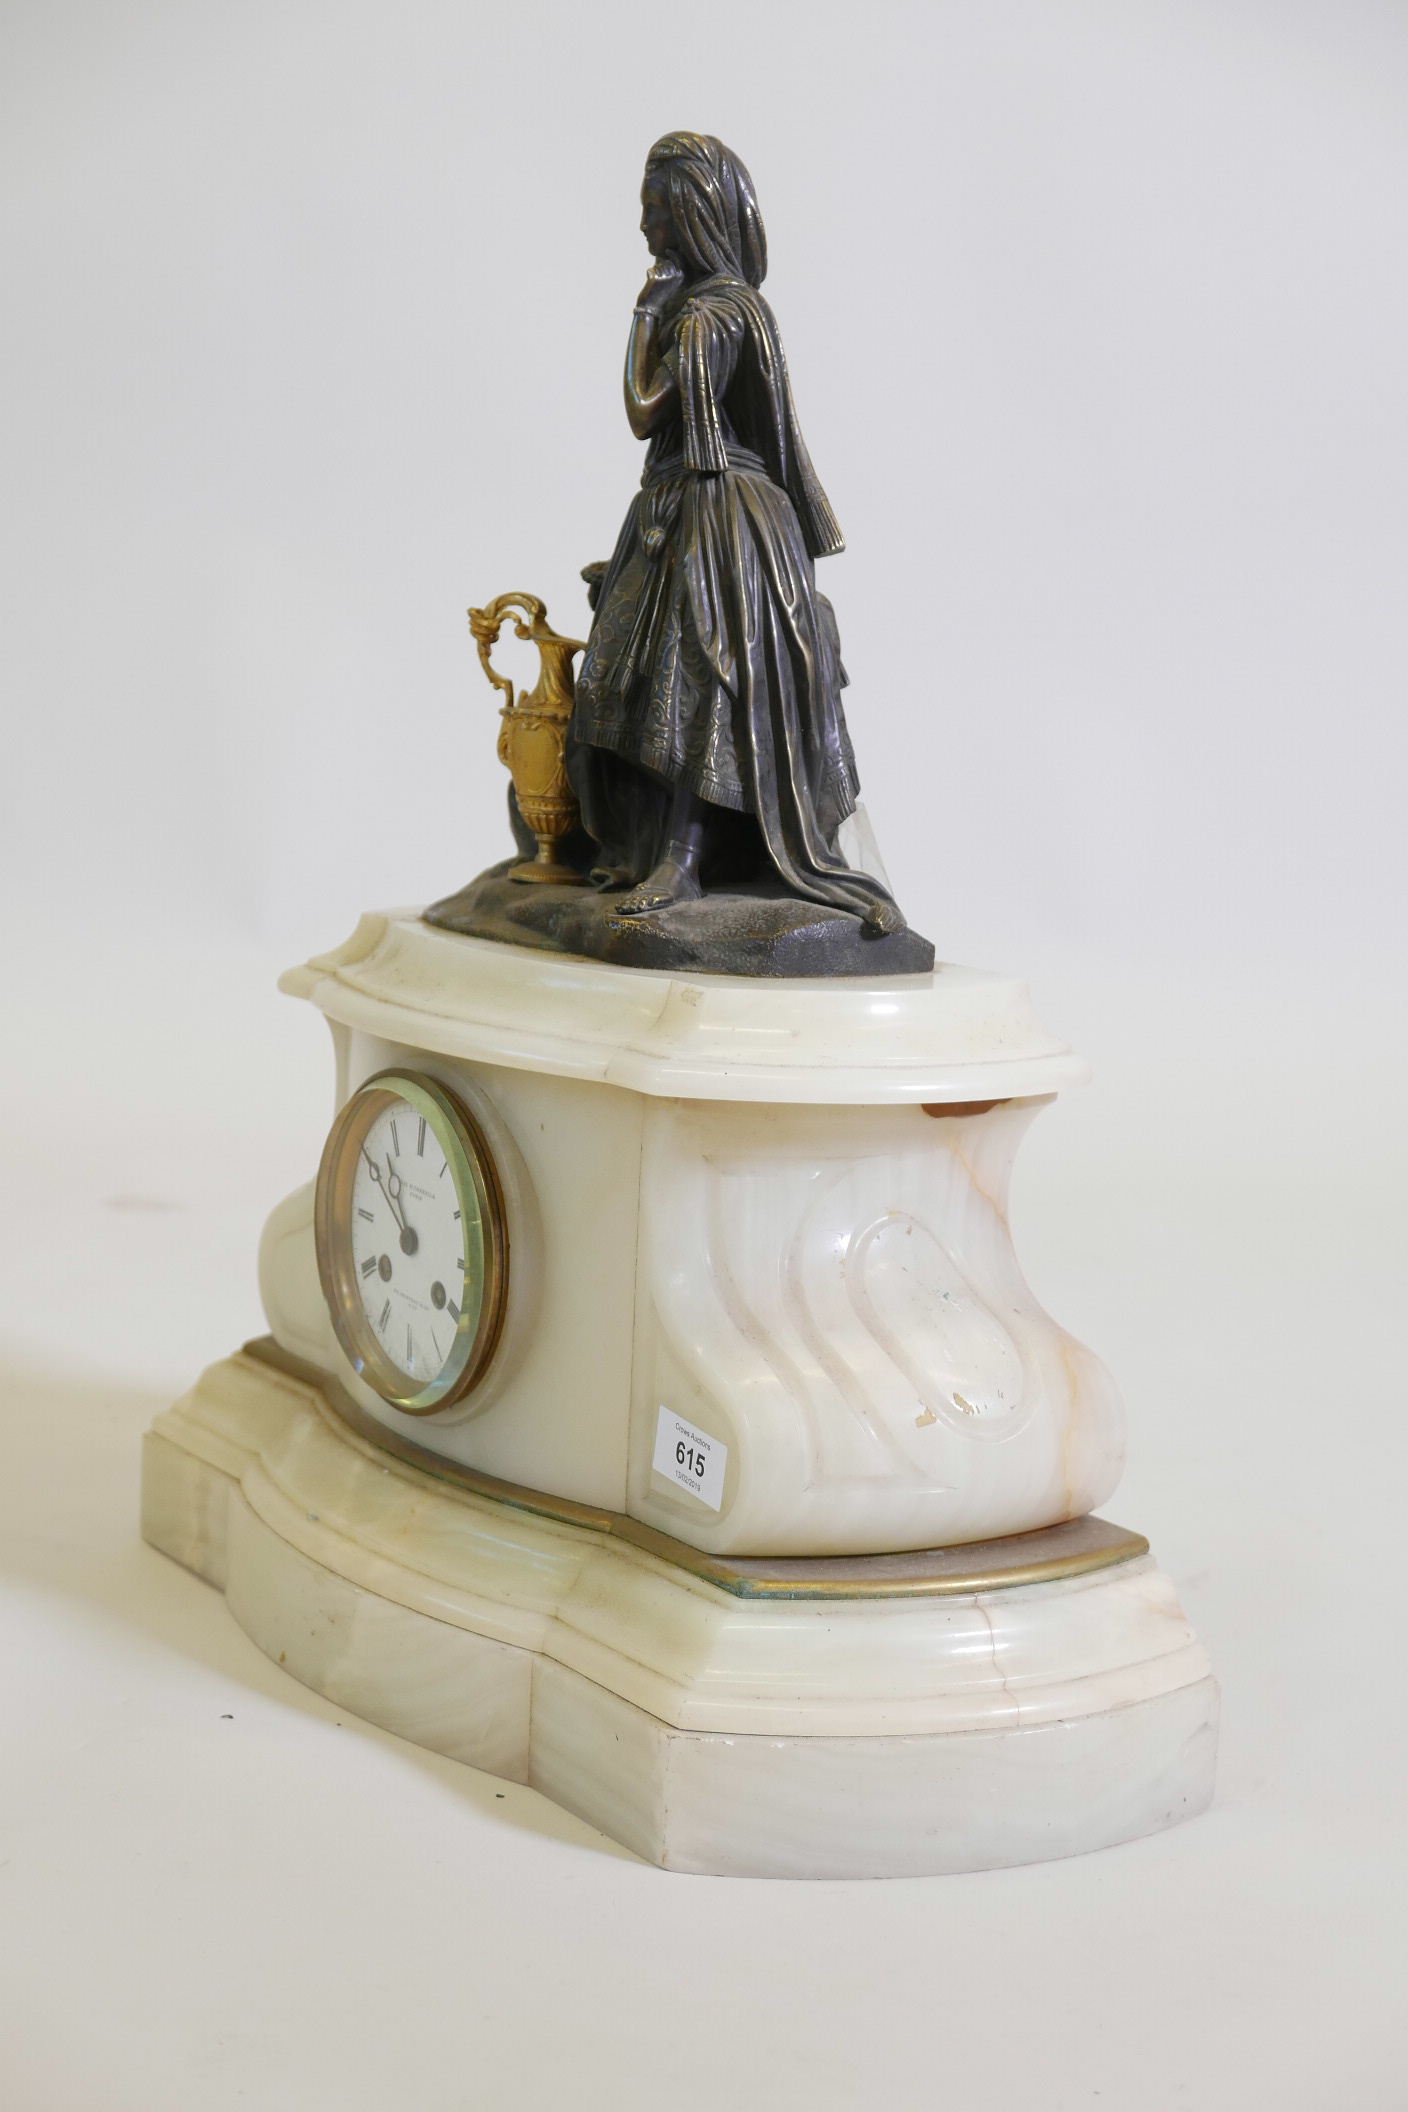 A C19th French onyx mantel clock, with a bronze and ormolu figure of an Ottoman woman with ewer, the - Image 4 of 5